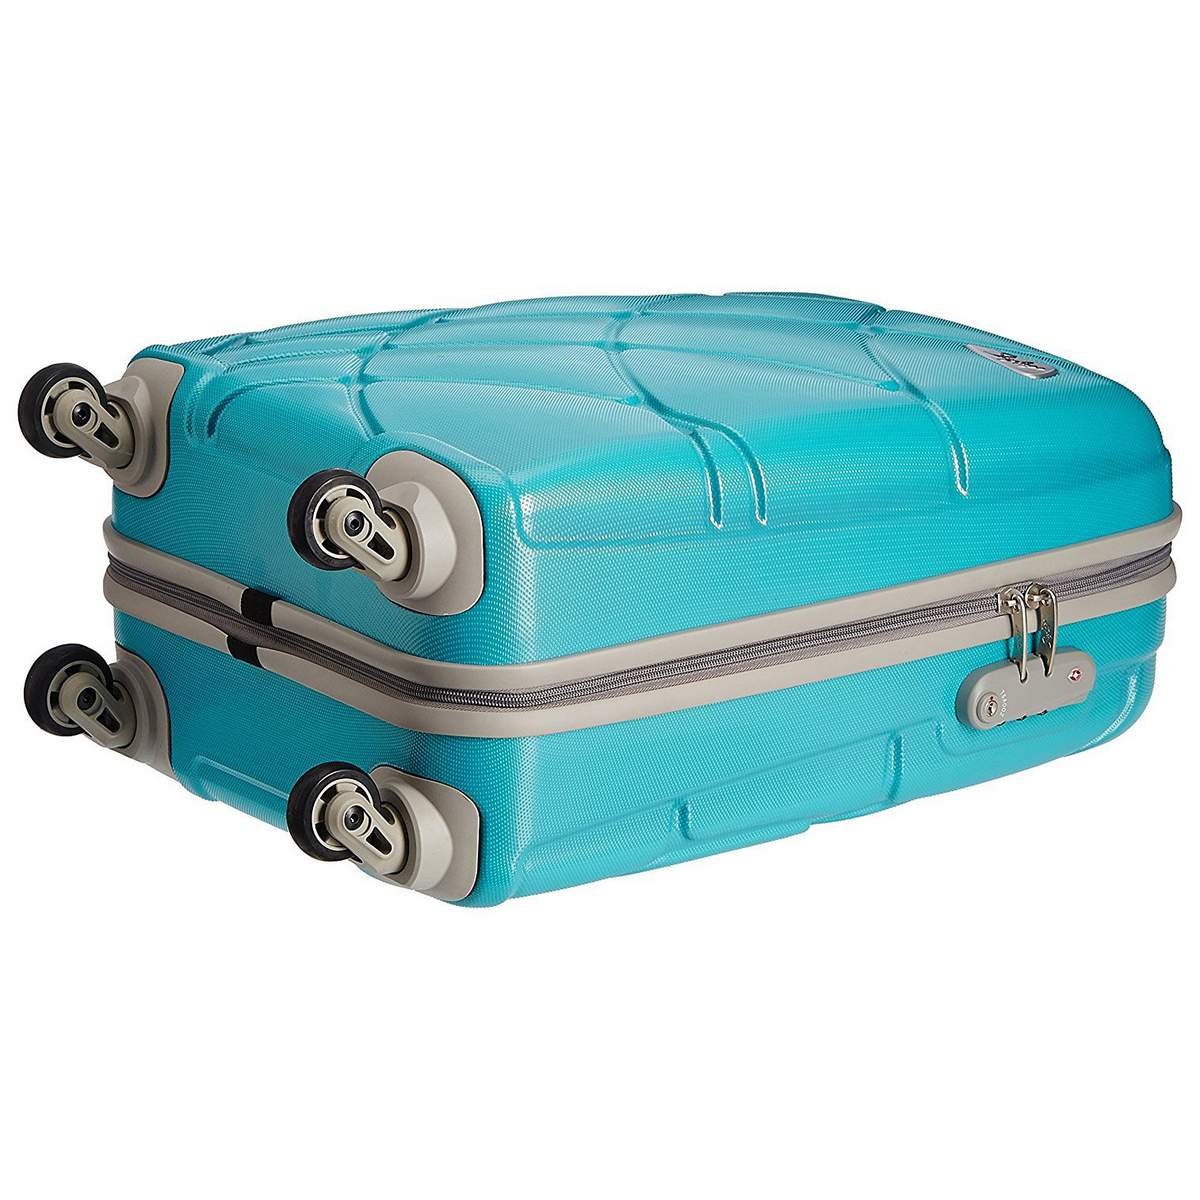 Skybags Reef Spinner 55cm Cabin Size Hard Luggage Bag